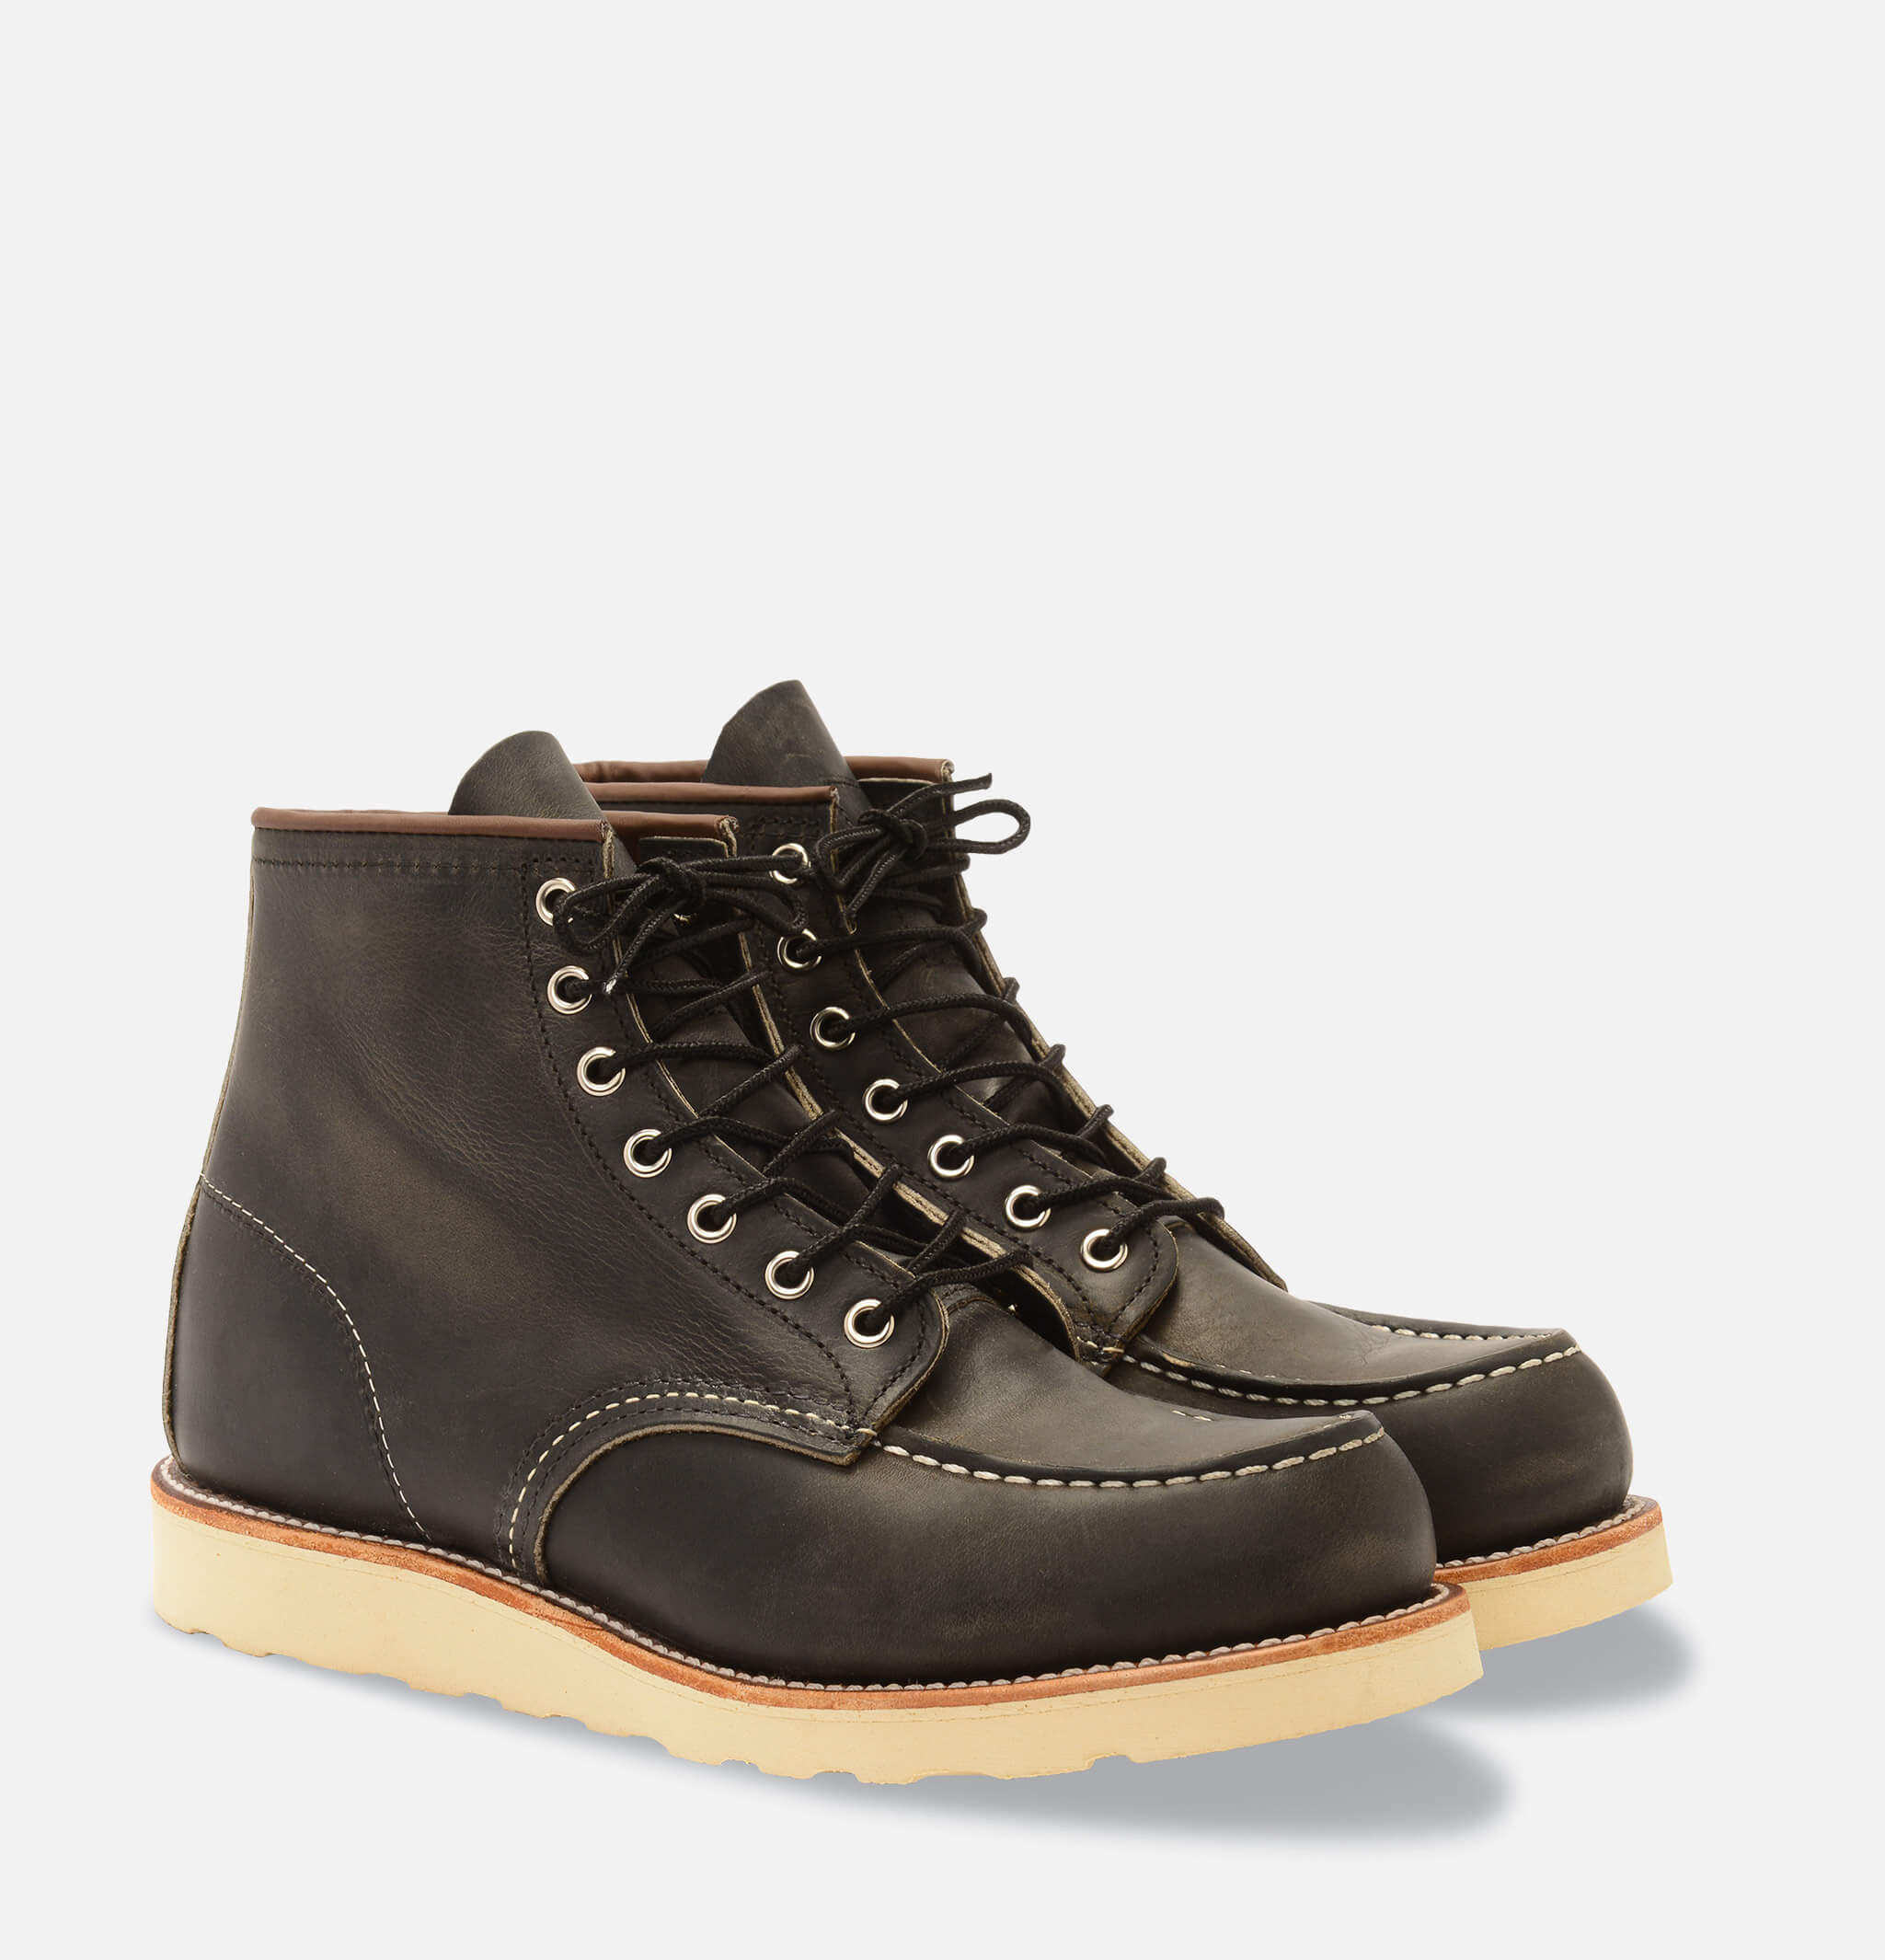 Red Wing Shoes | Moc Toe 8890 Charcoal | Royalcheese Paris - Royalcheese